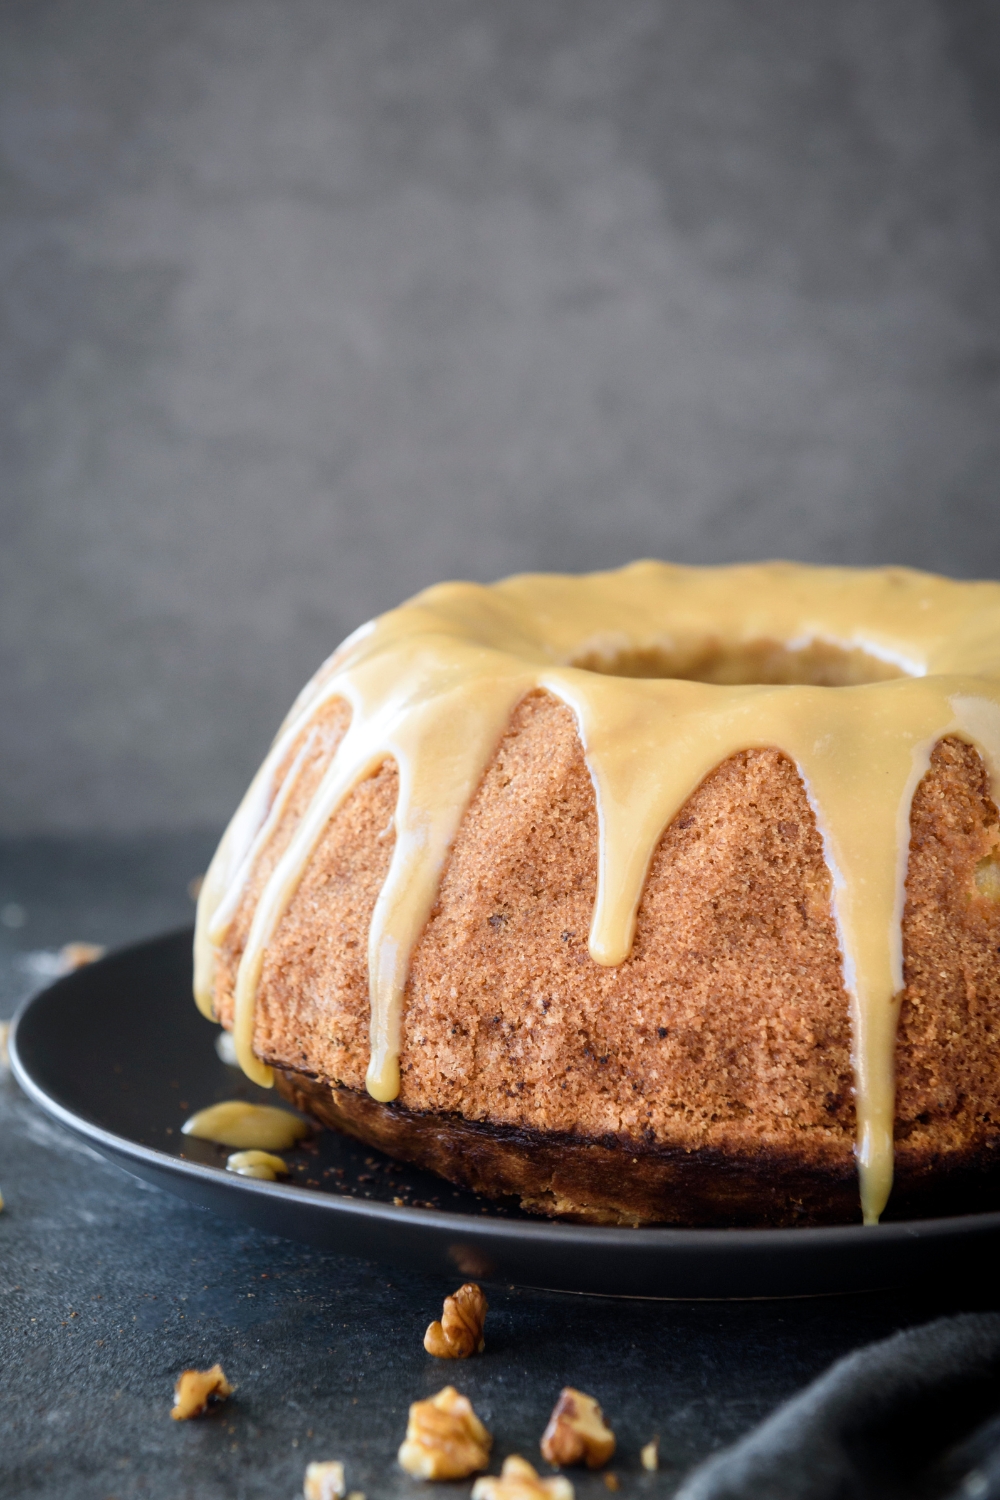 A bundt cake covered in a caramel glaze that is dripping down the sides of the cake.